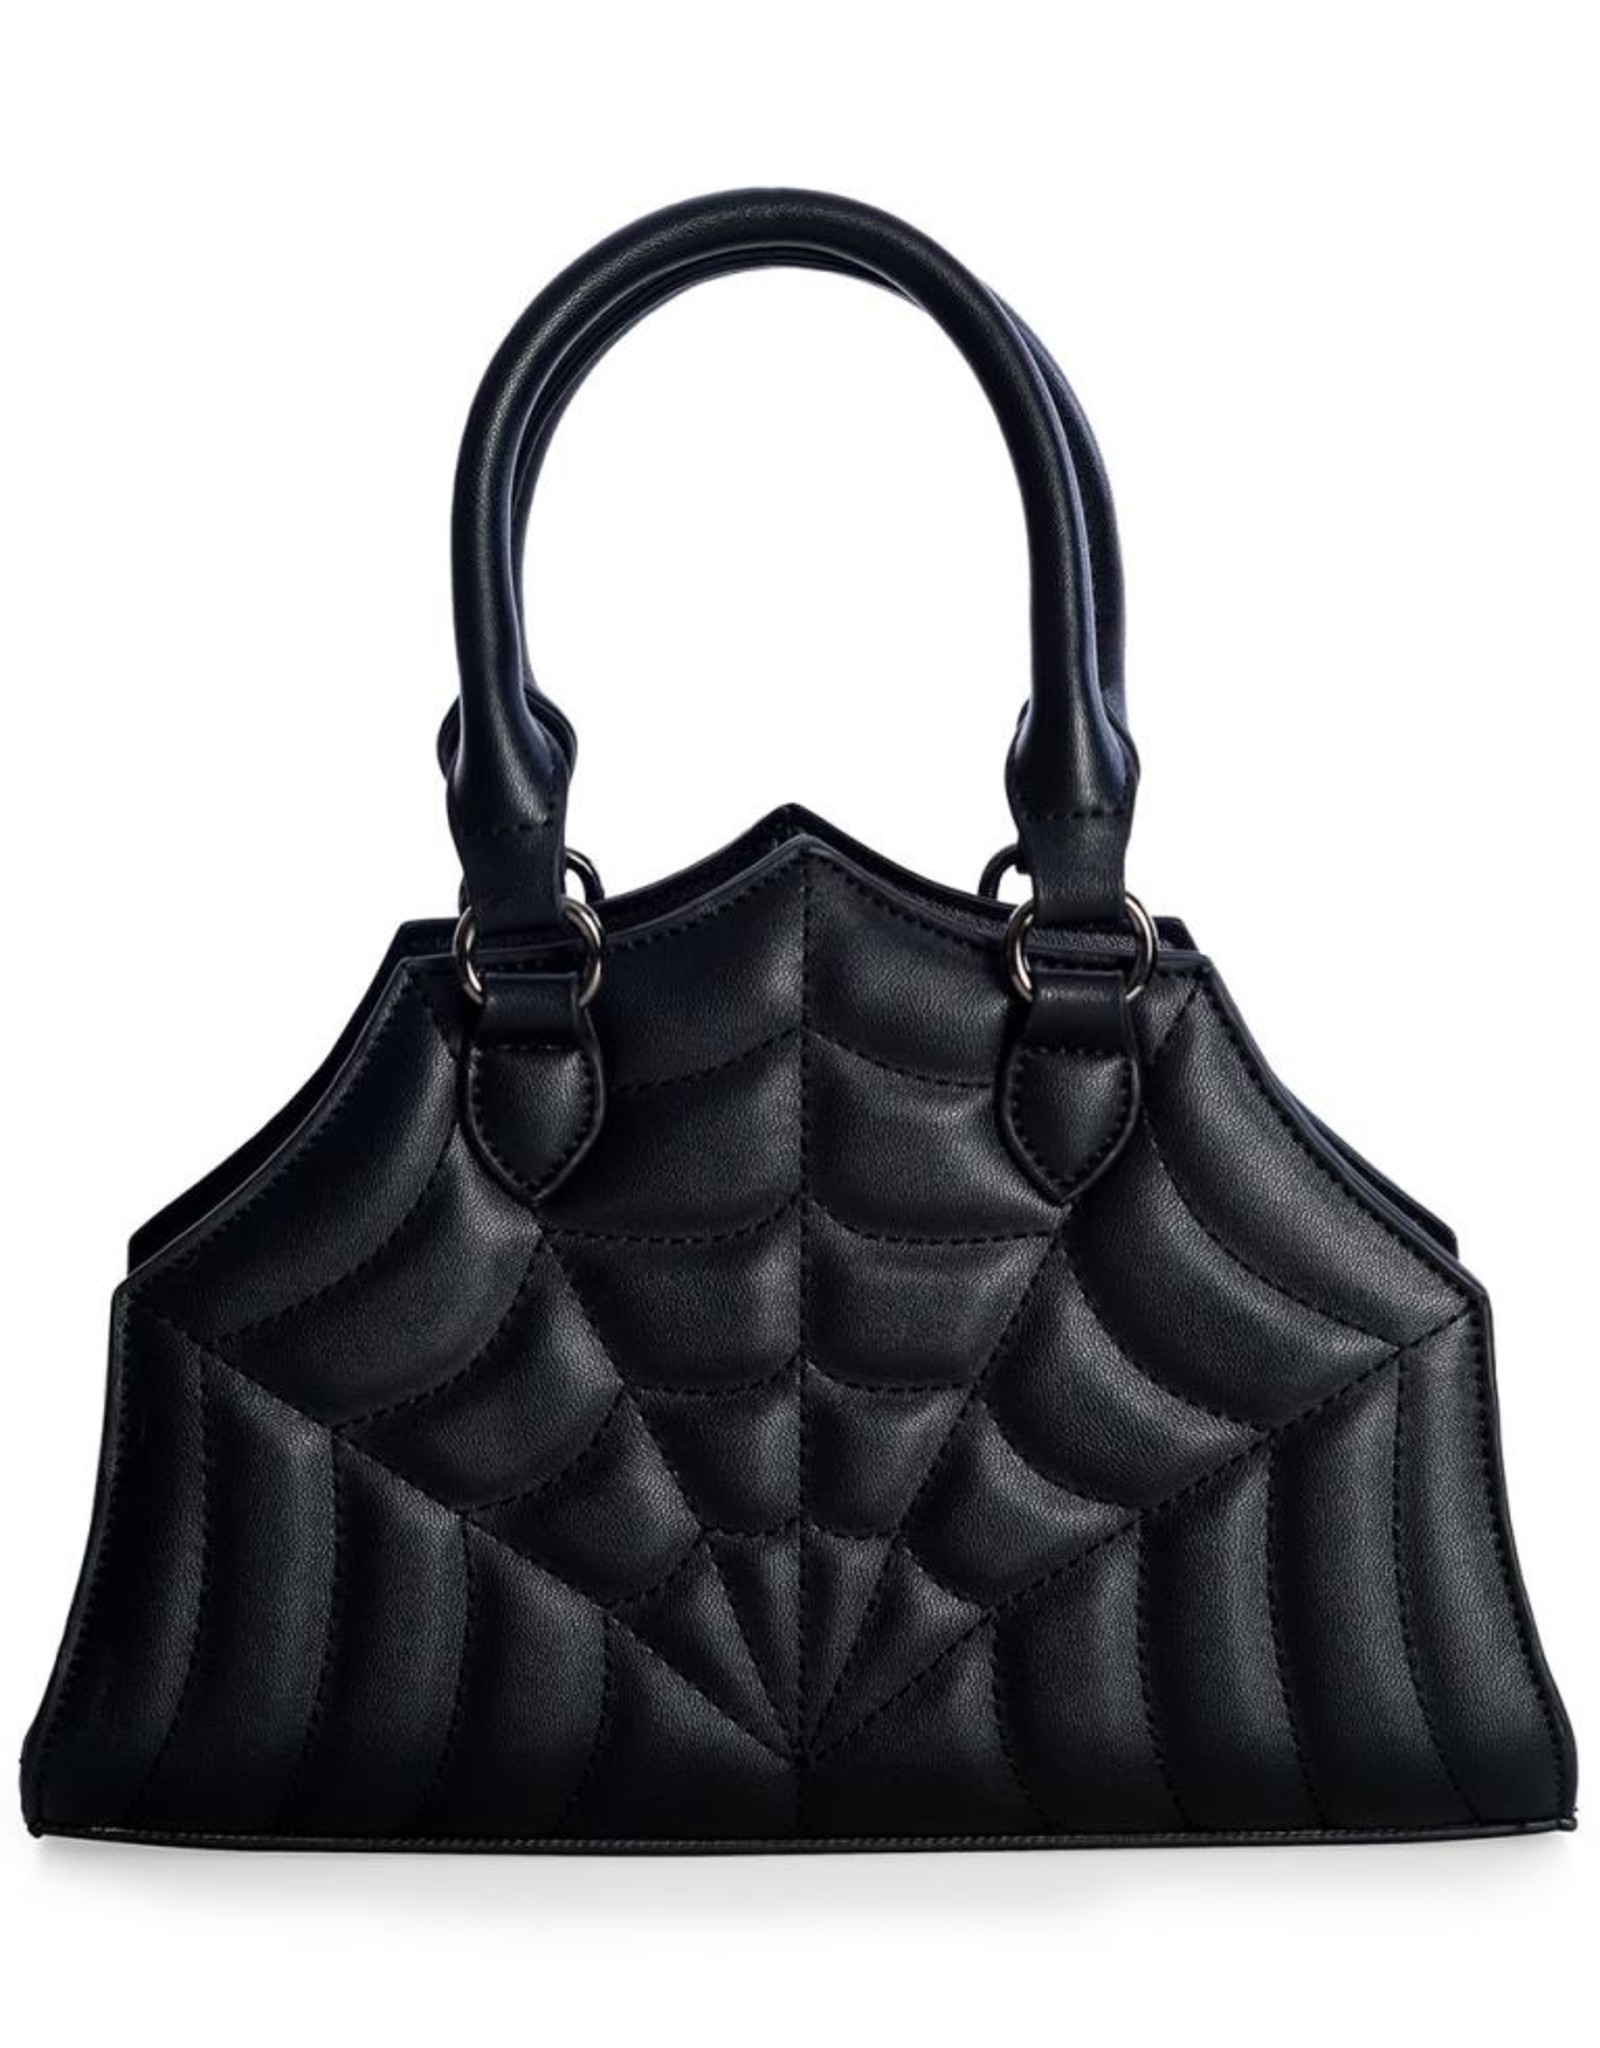 Banned Gothic bags Steampunk bags - Sirin Handbag with Embosed Spiderweb